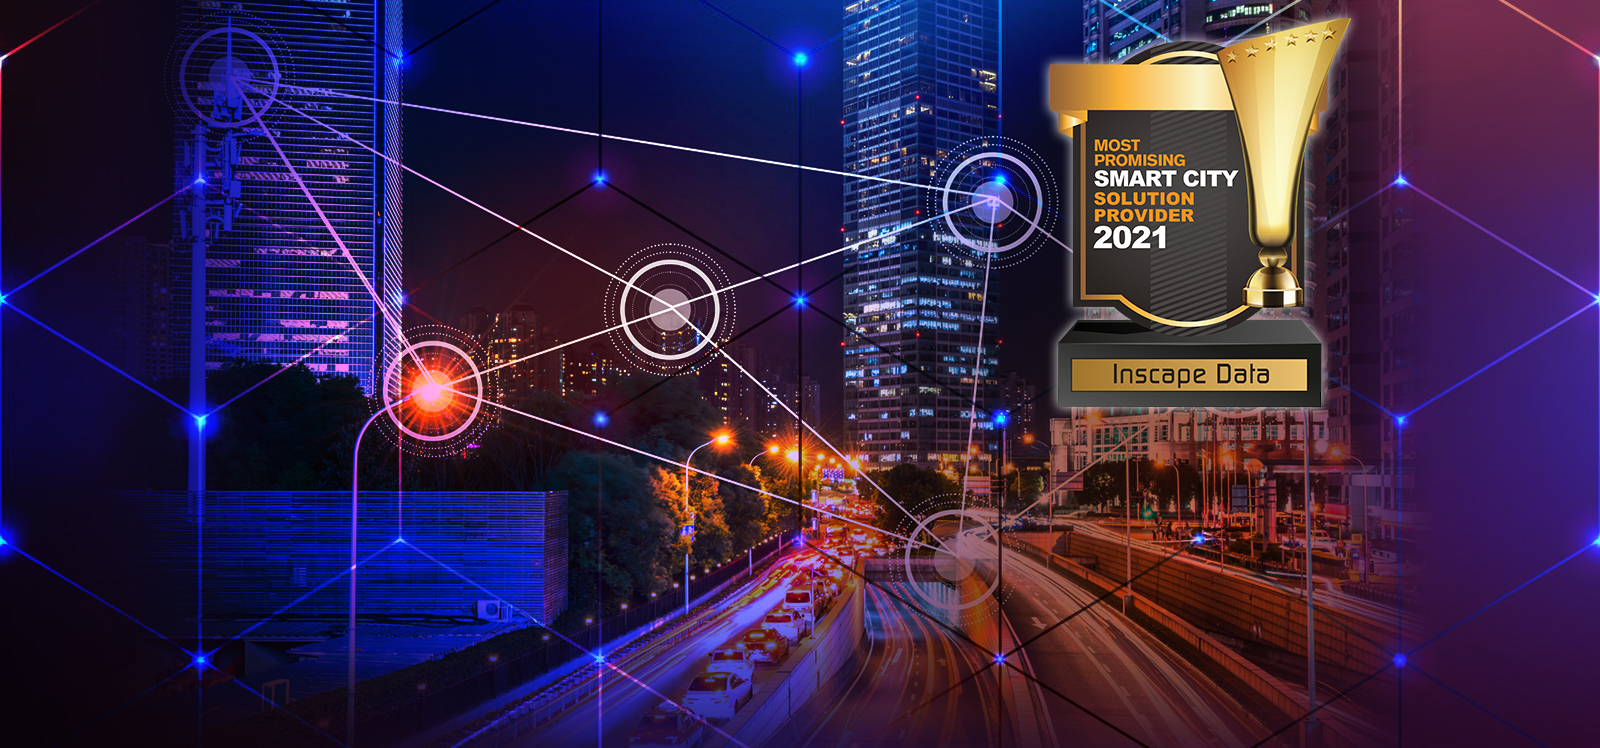 Top 20 Smart City Solution Providers 2021